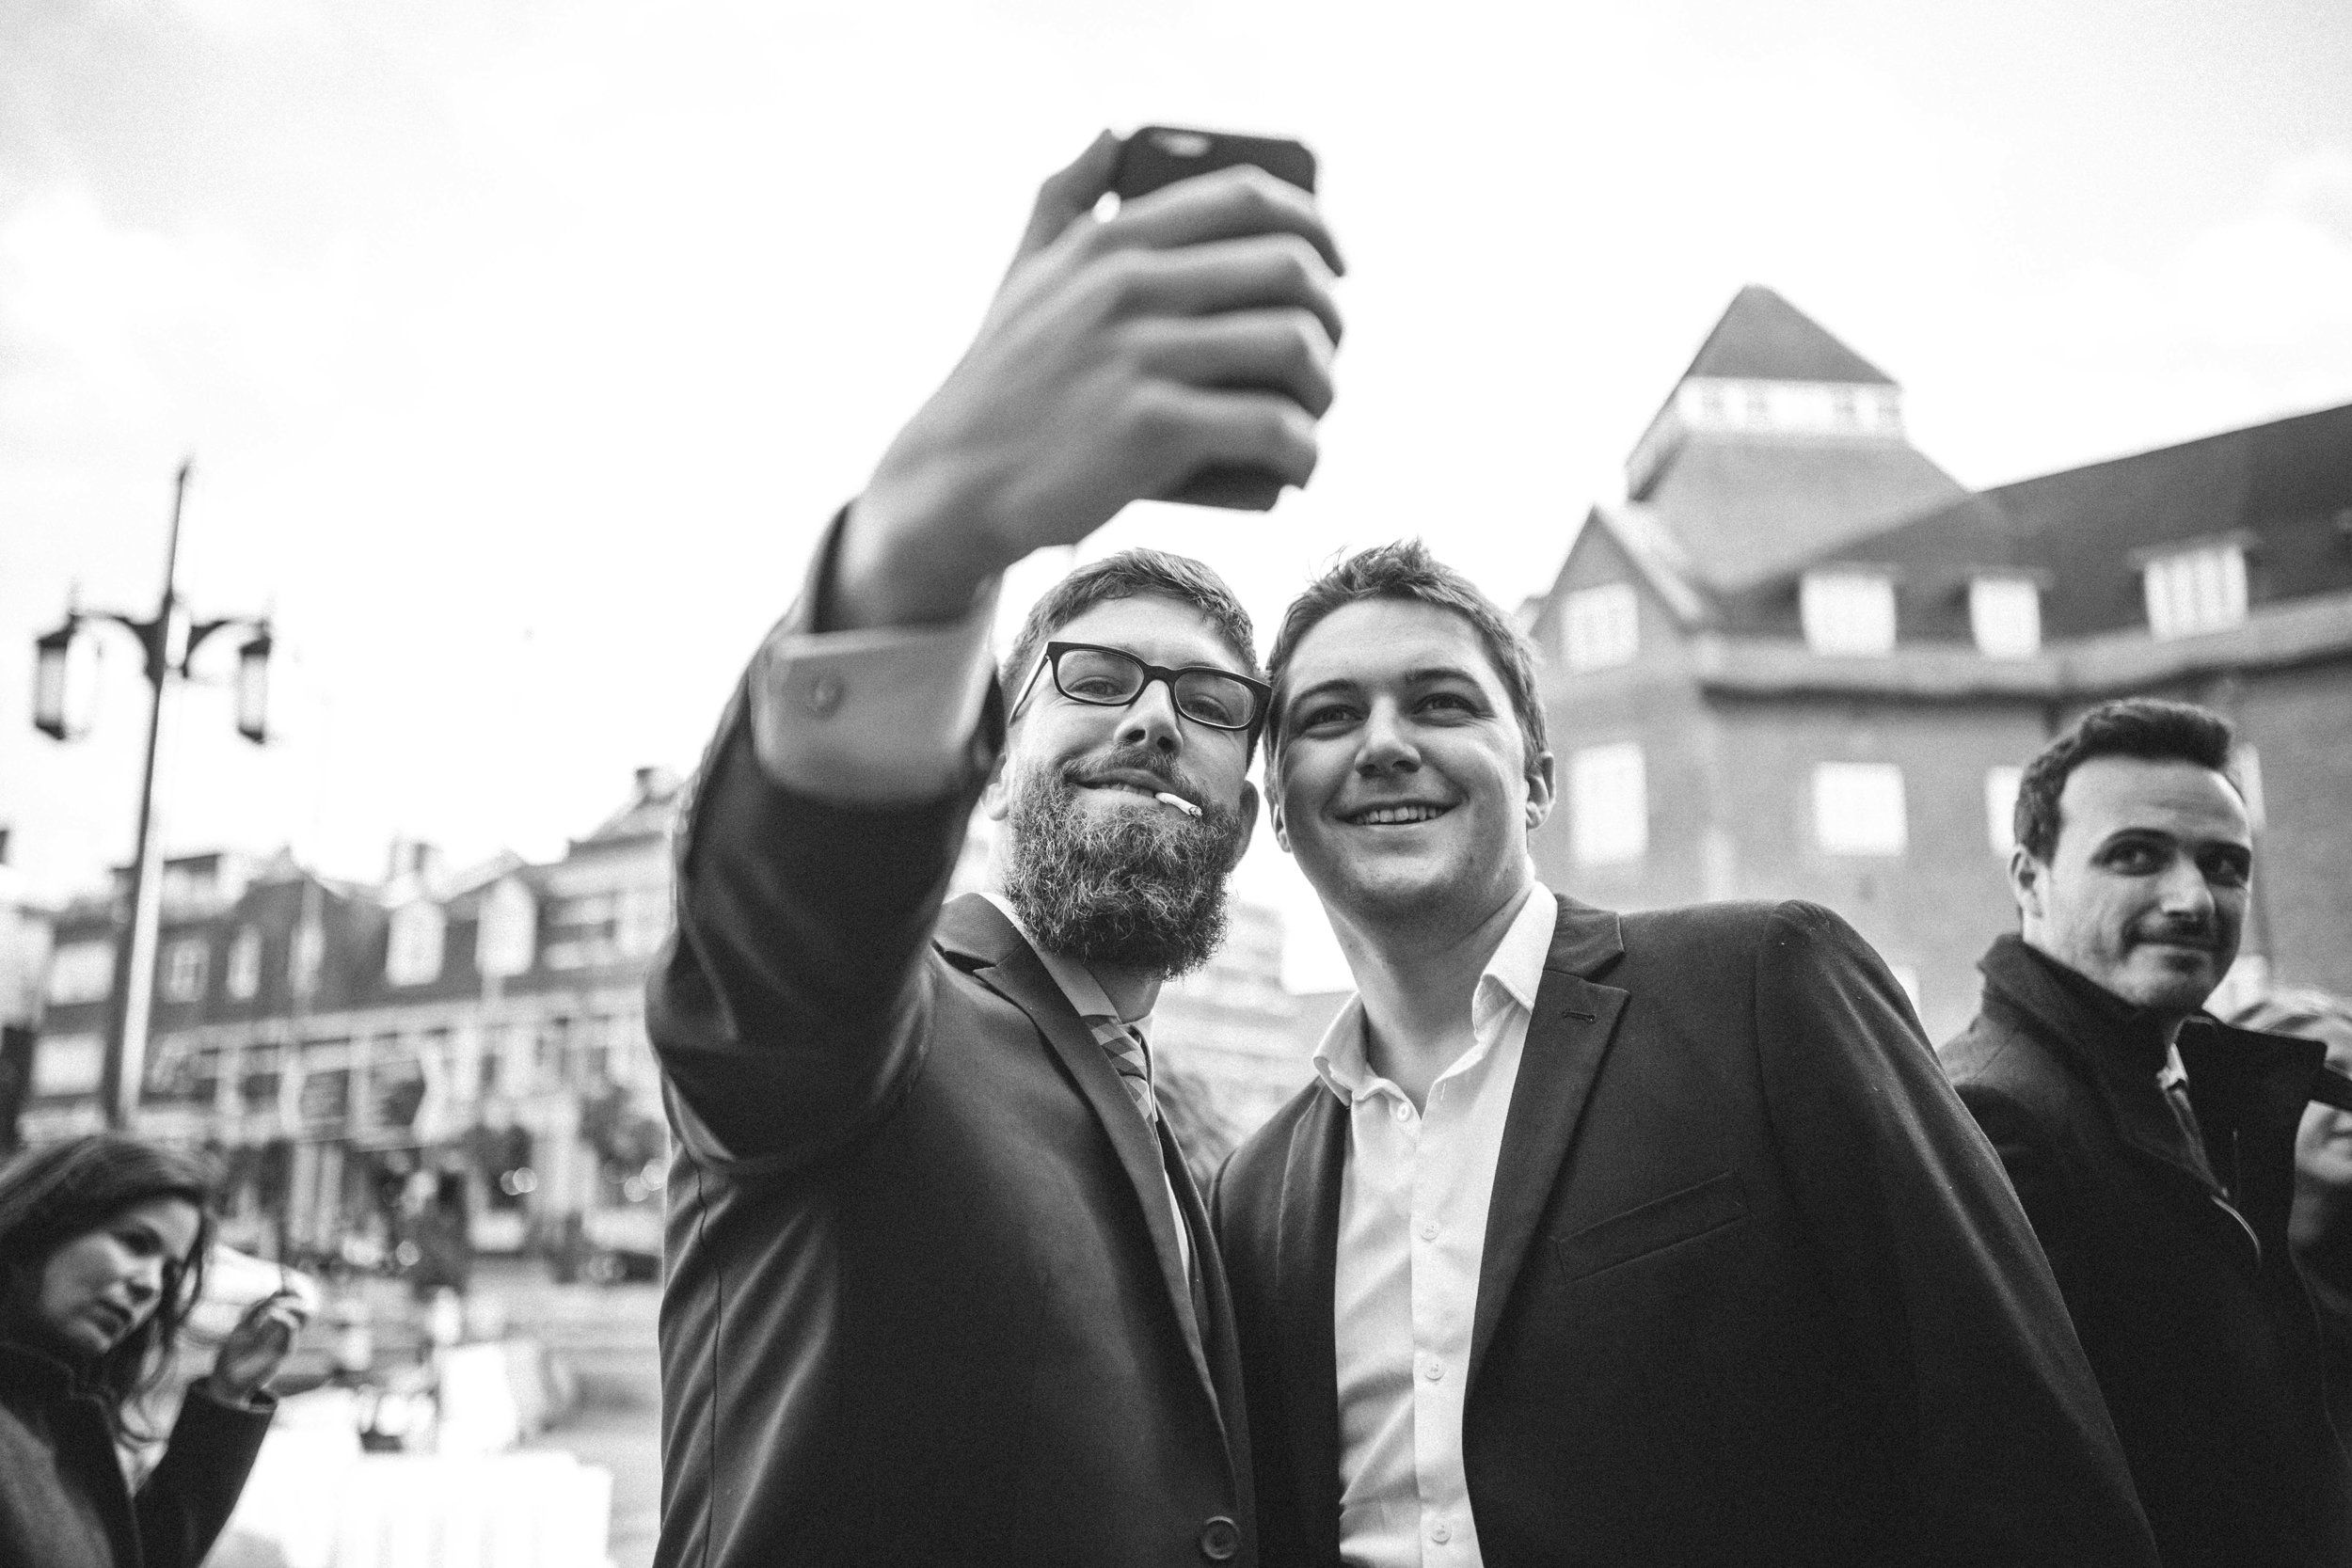 Wedding guests Selfie and a fag